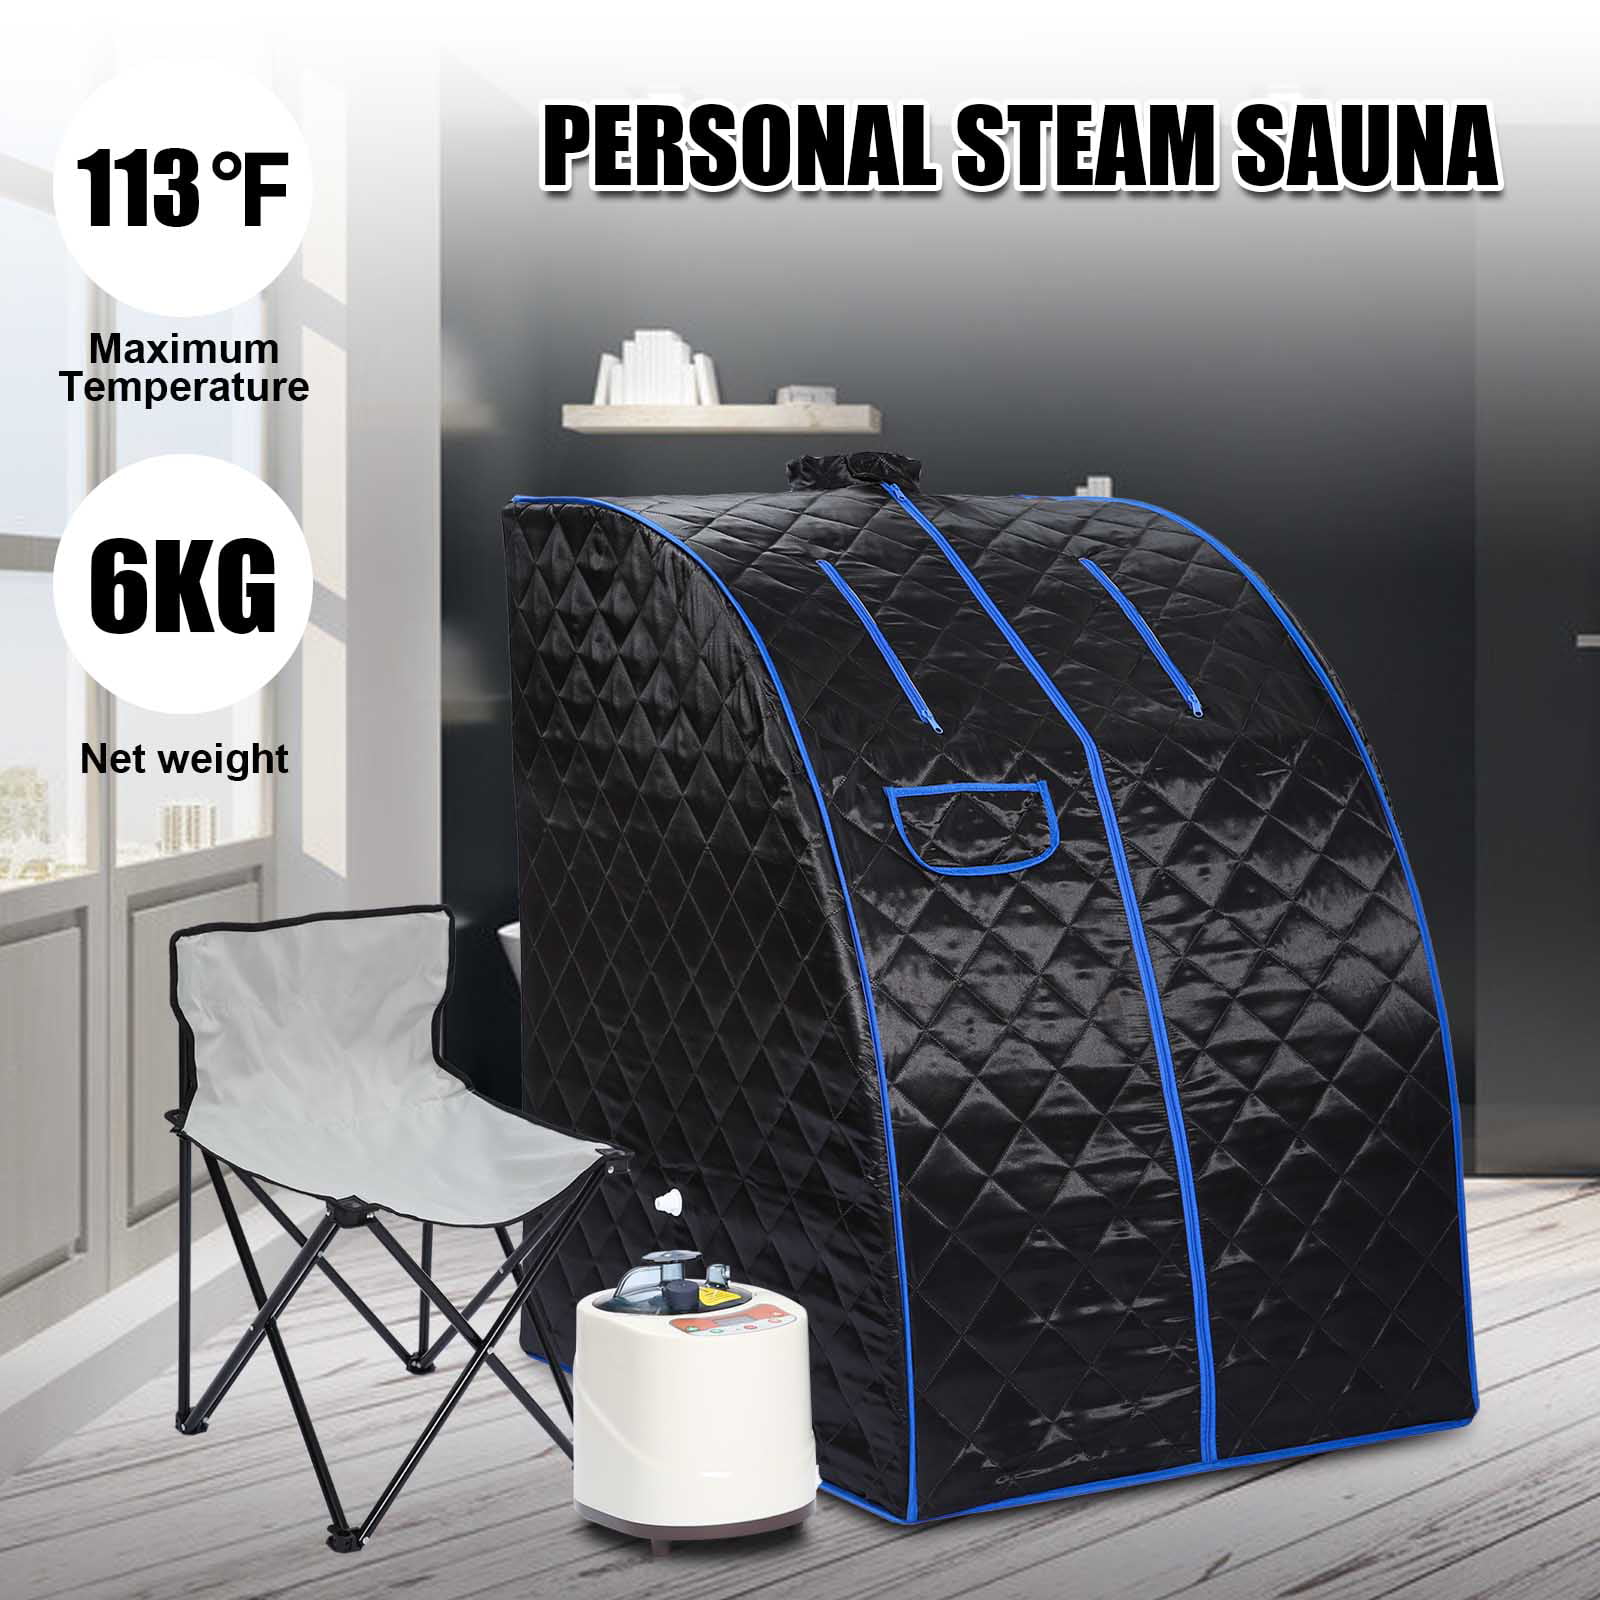 PUTAOYOU Portable Steam Sauna Spa Foldable Home Steam Sauna Upgrade 2L Steamer One Person Full Body Spa for Weight Loss Detox Therapy Relaxation at Home Lightweight Tent